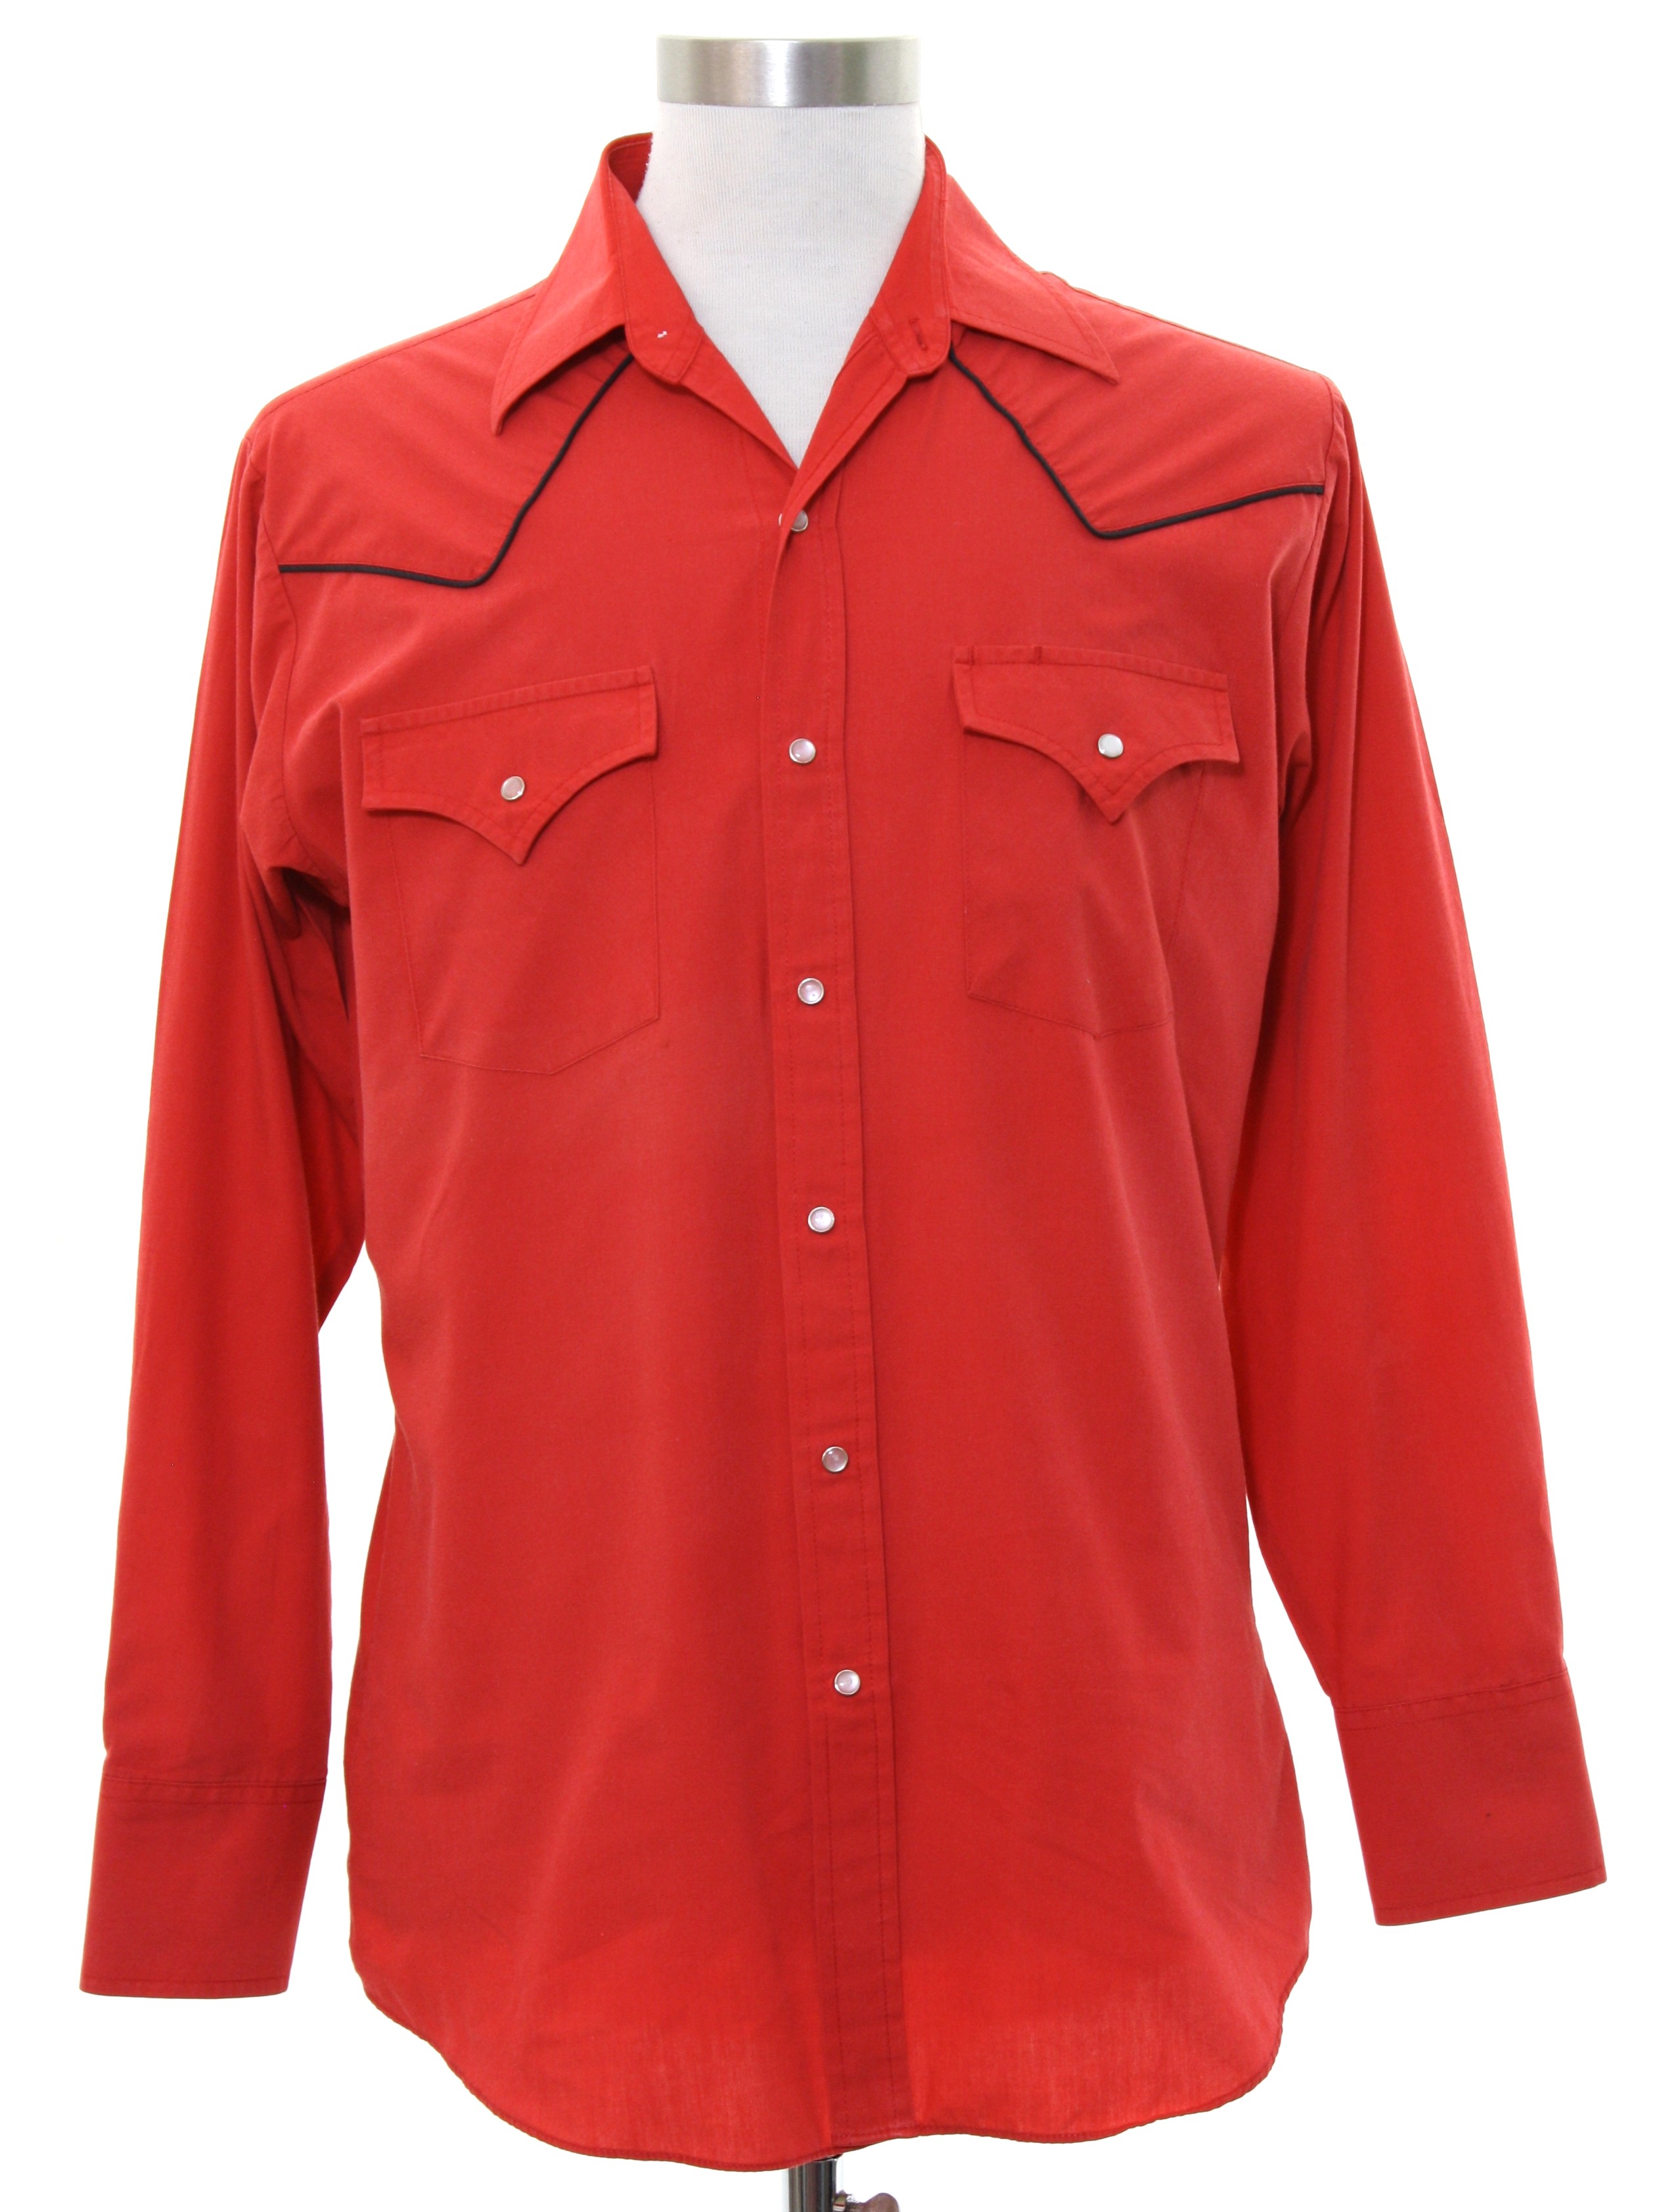 Retro 1980's Western Shirt (Ely) : 80s -Ely- Mens red polyester cotton ...